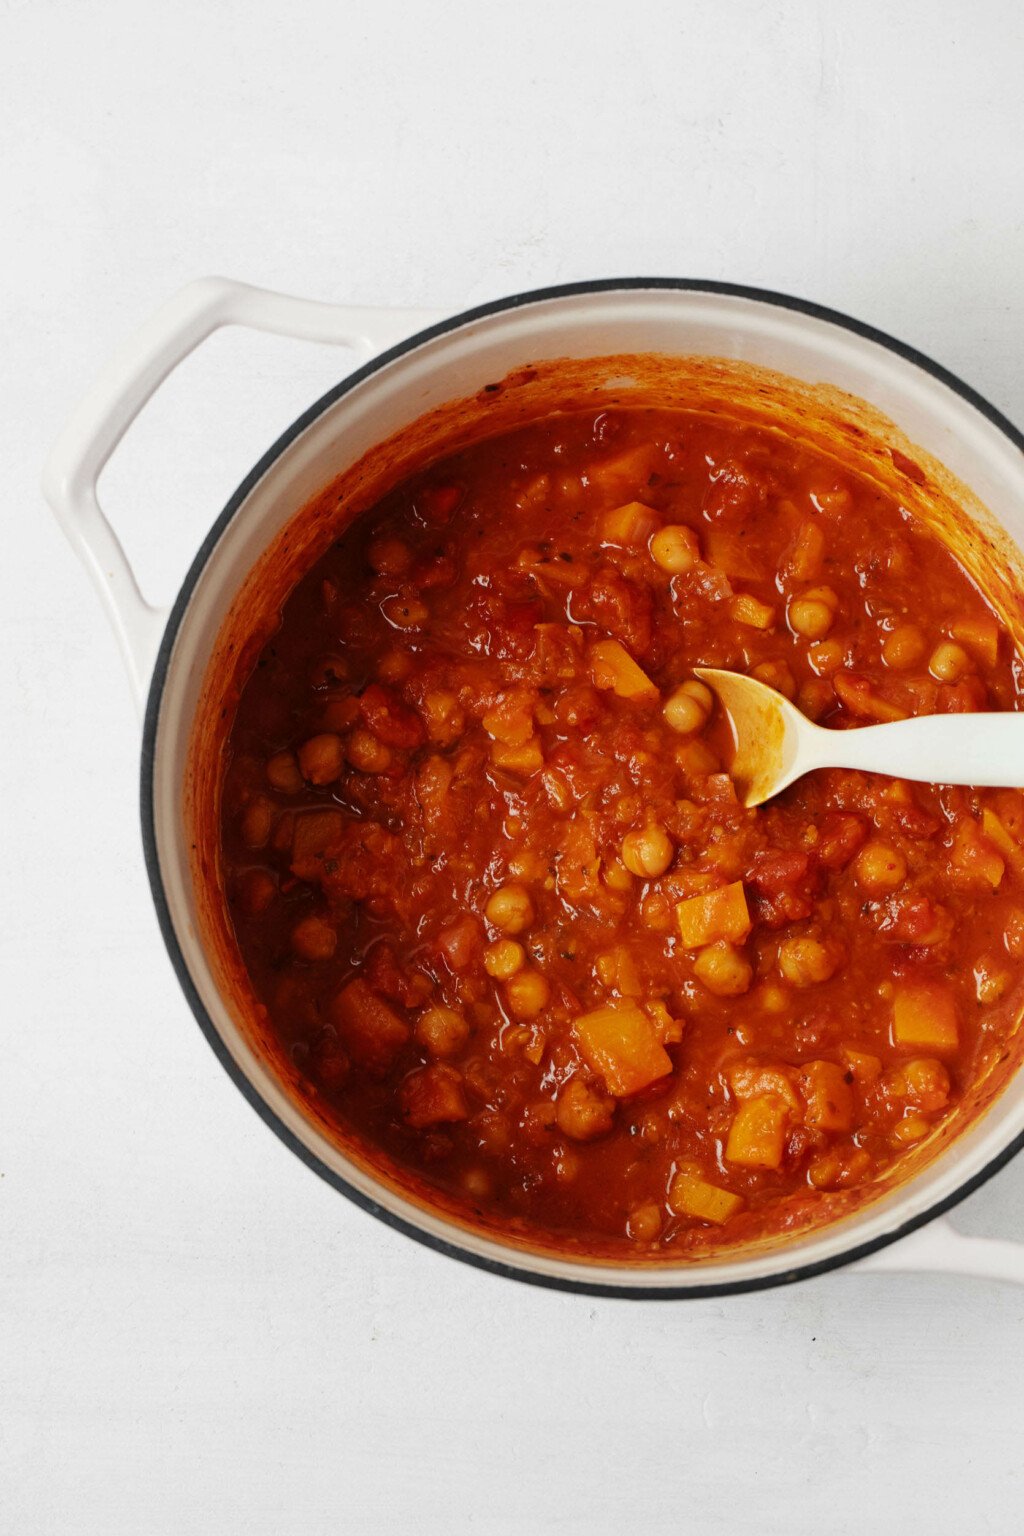 A large, white bowl contains a mixture of tomatoes, butternut squash and chickpeas.